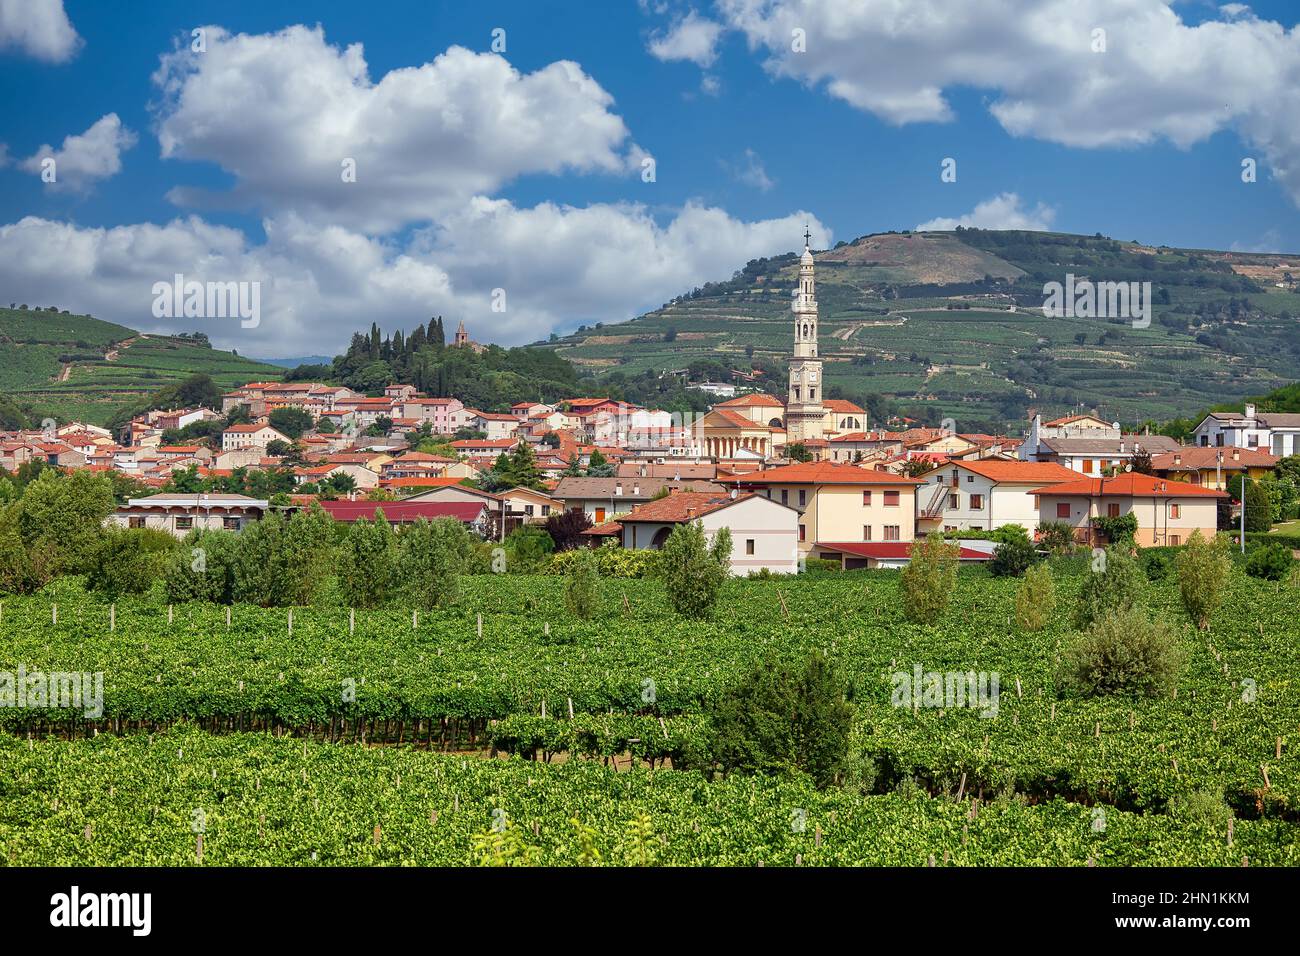 Panoramic view to the town of Monteforte d'Alpone, Italy Stock Photo